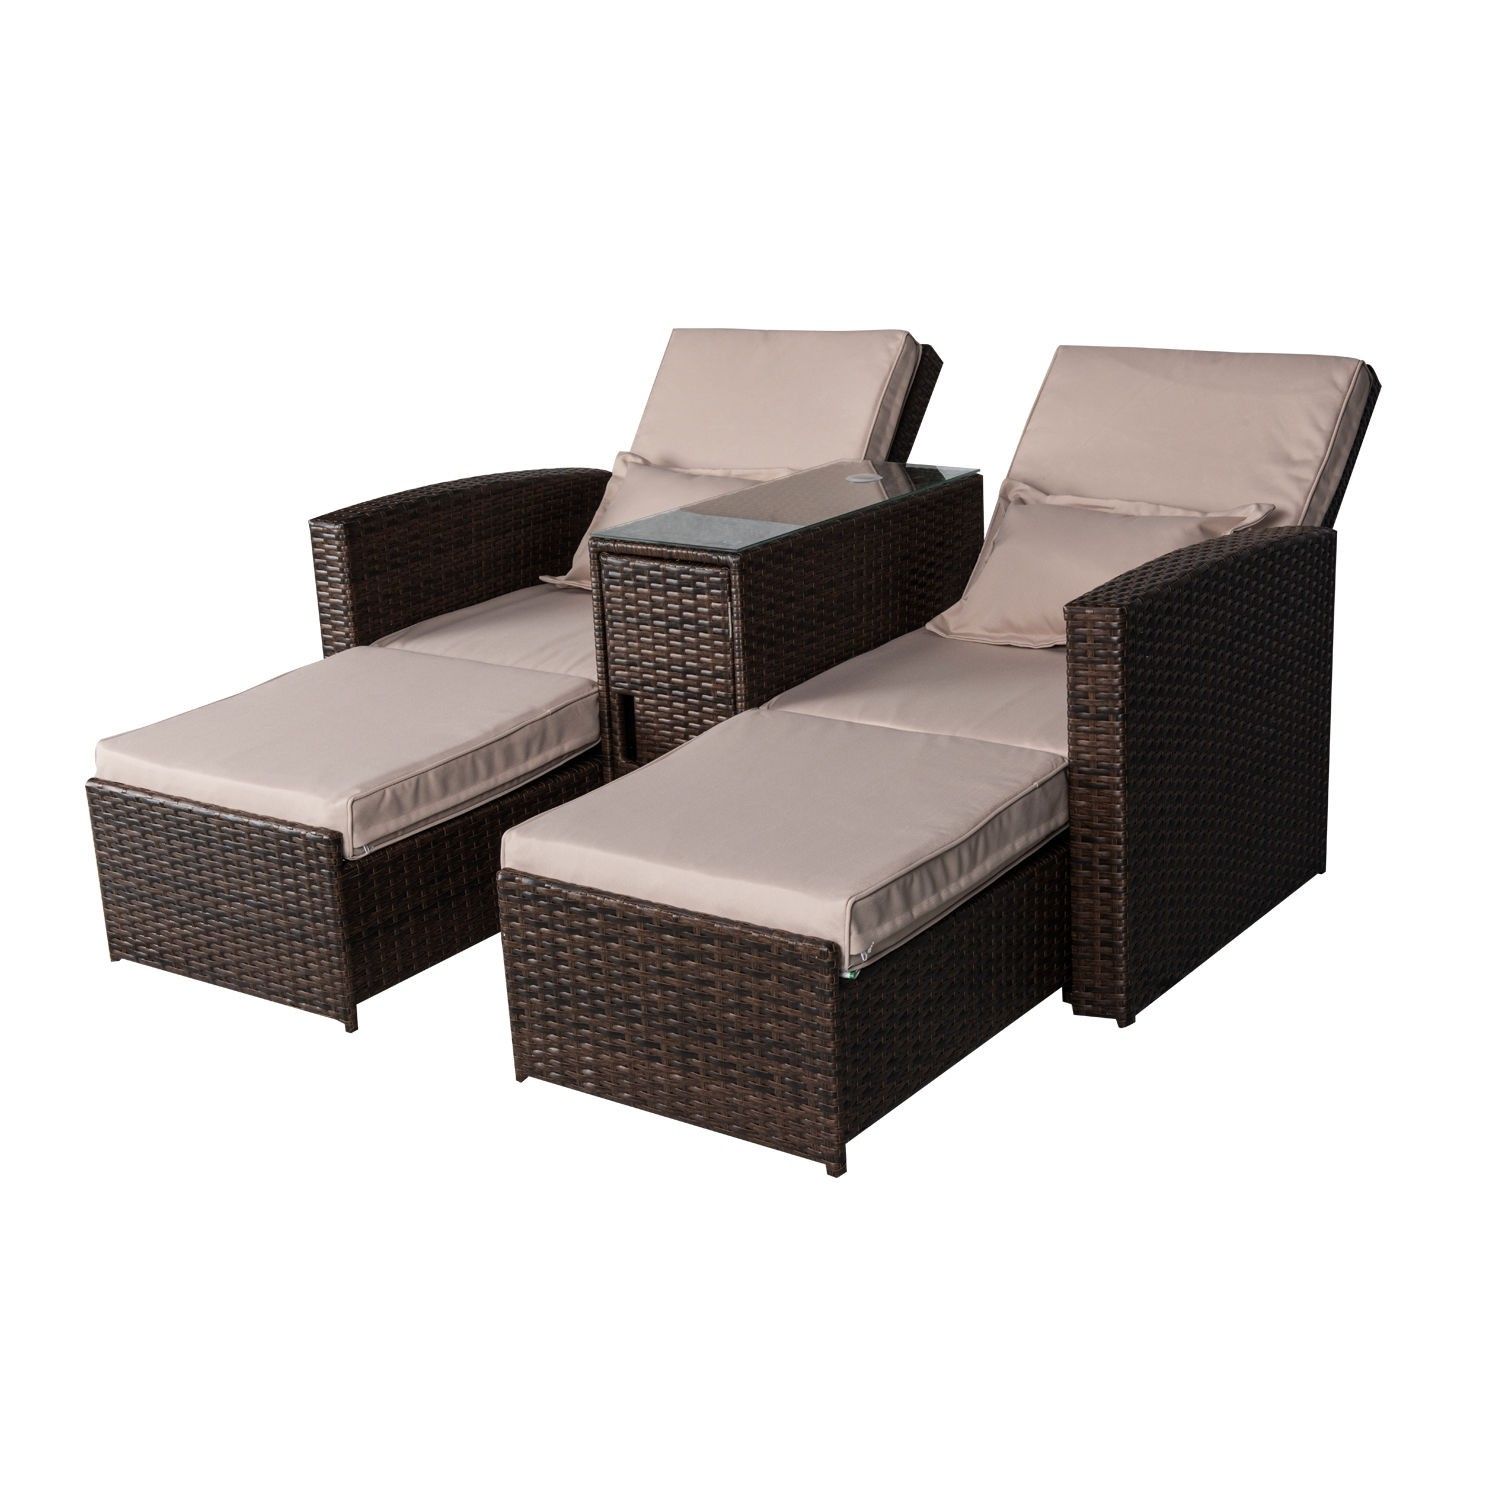 Outsunny 3 Piece Outdoor Rattan Wicker Chaise Lounge With Colby Manual Reclining Sofas (View 14 of 15)